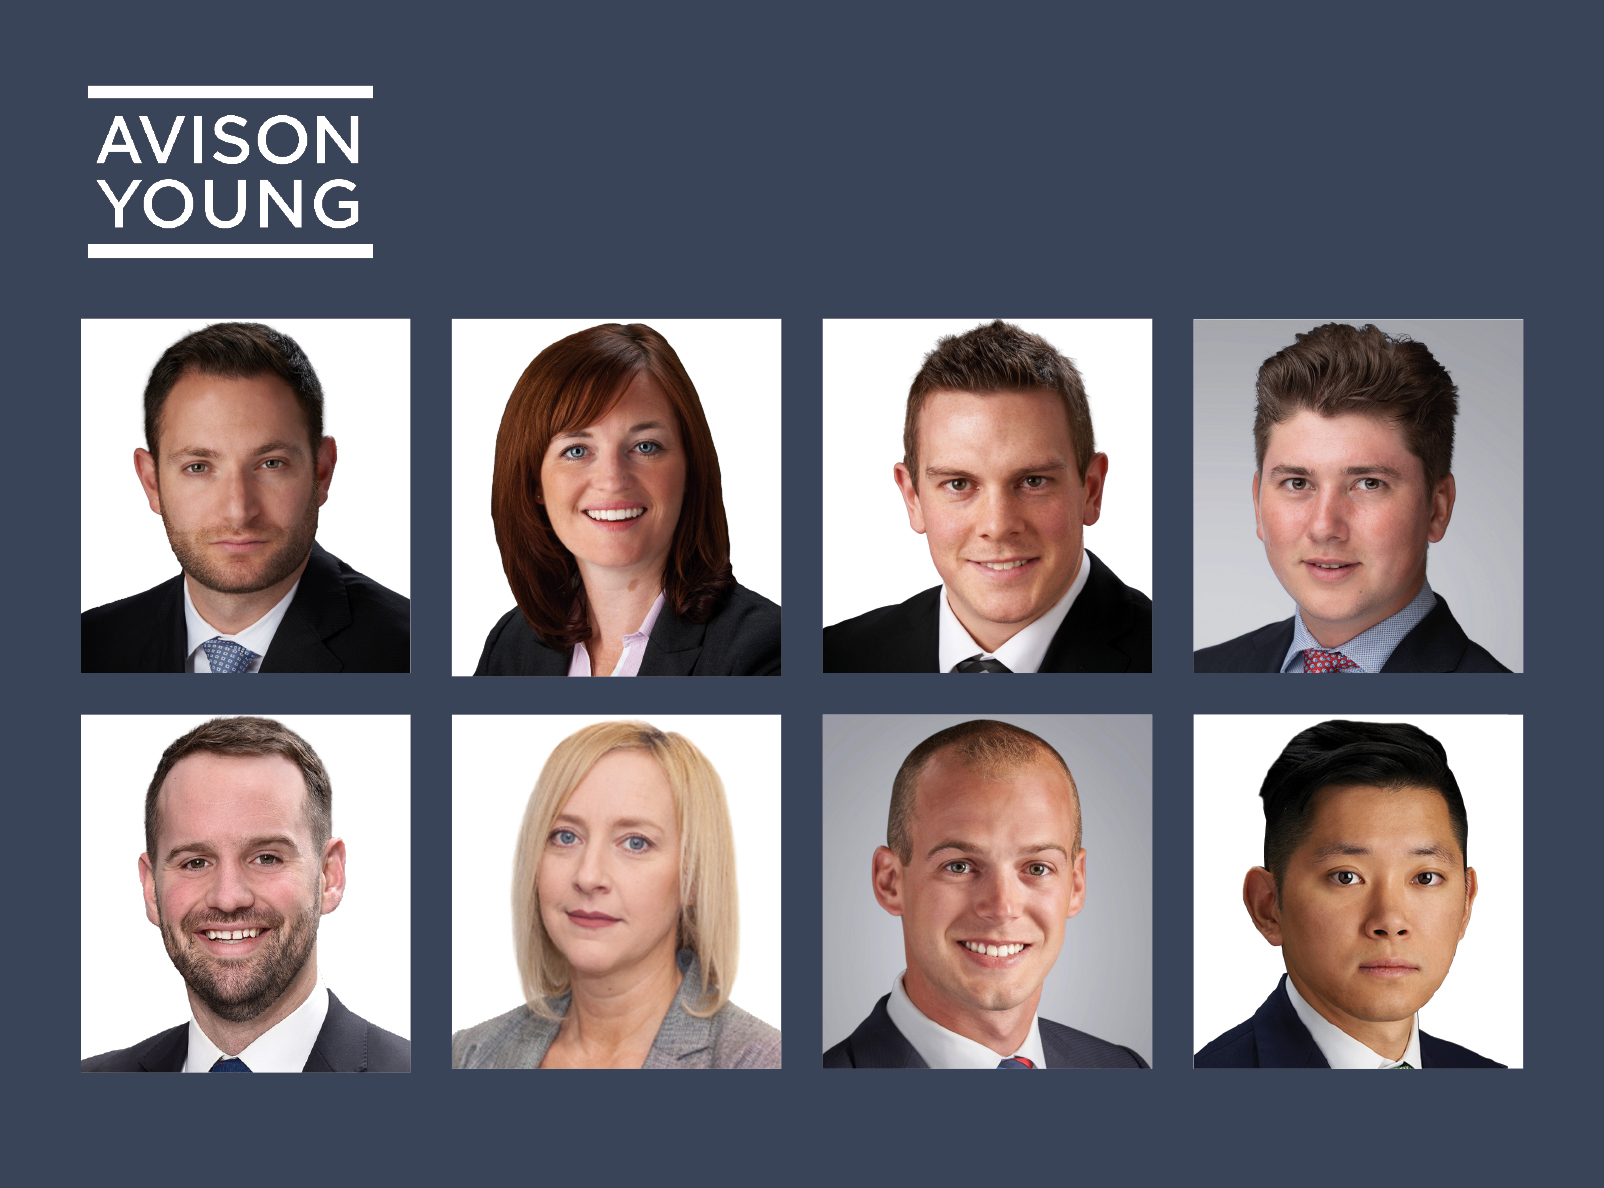 Avison Young welcomes Ontario-based leaders to its 2022 Principal Class